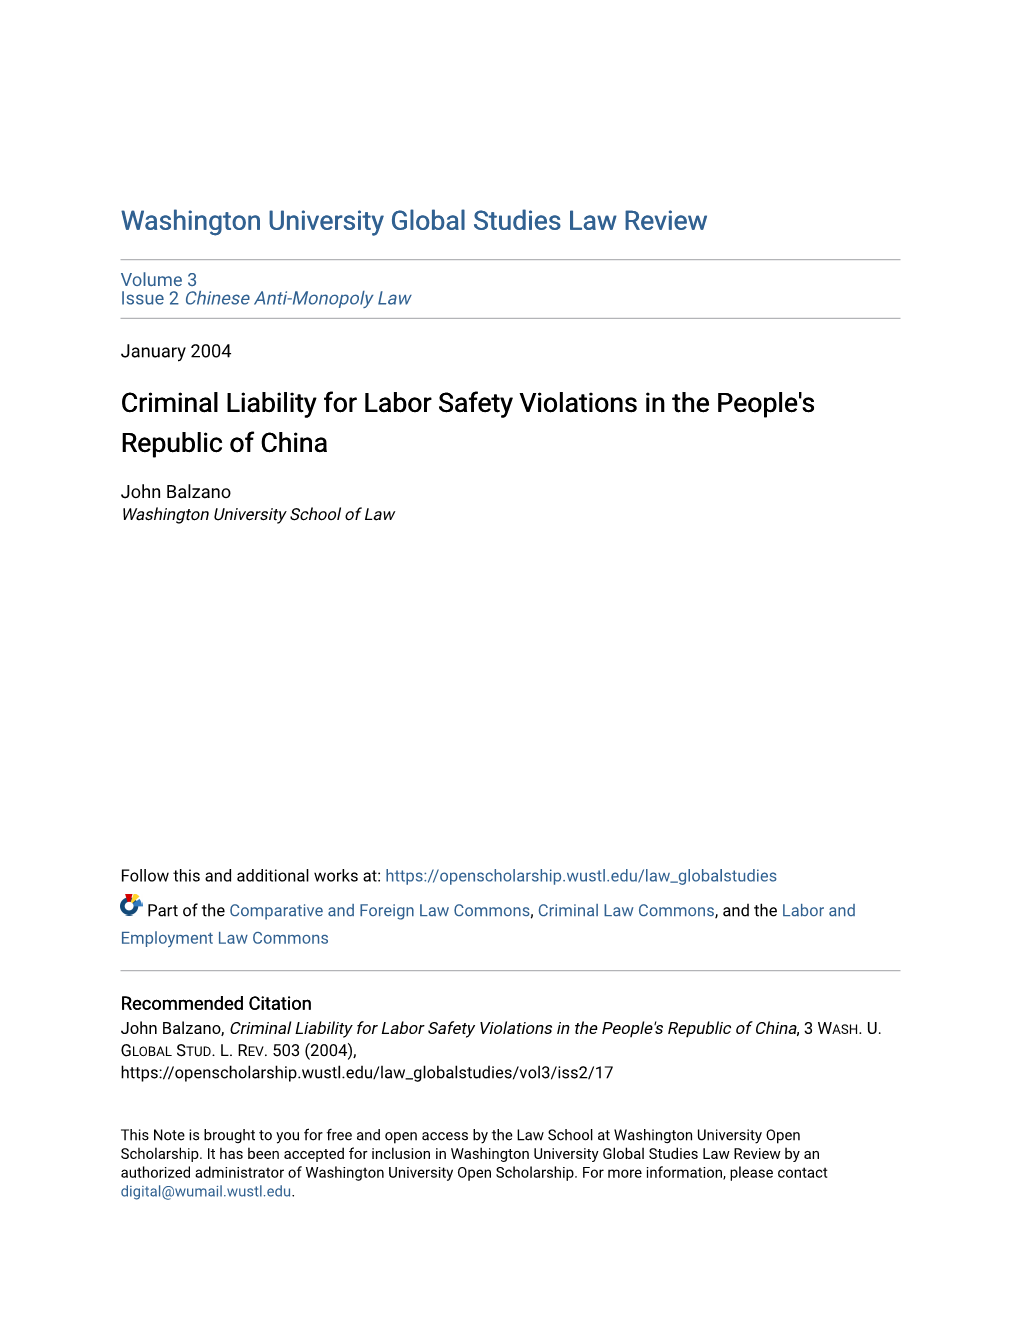 Criminal Liability for Labor Safety Violations in the People's Republic of China